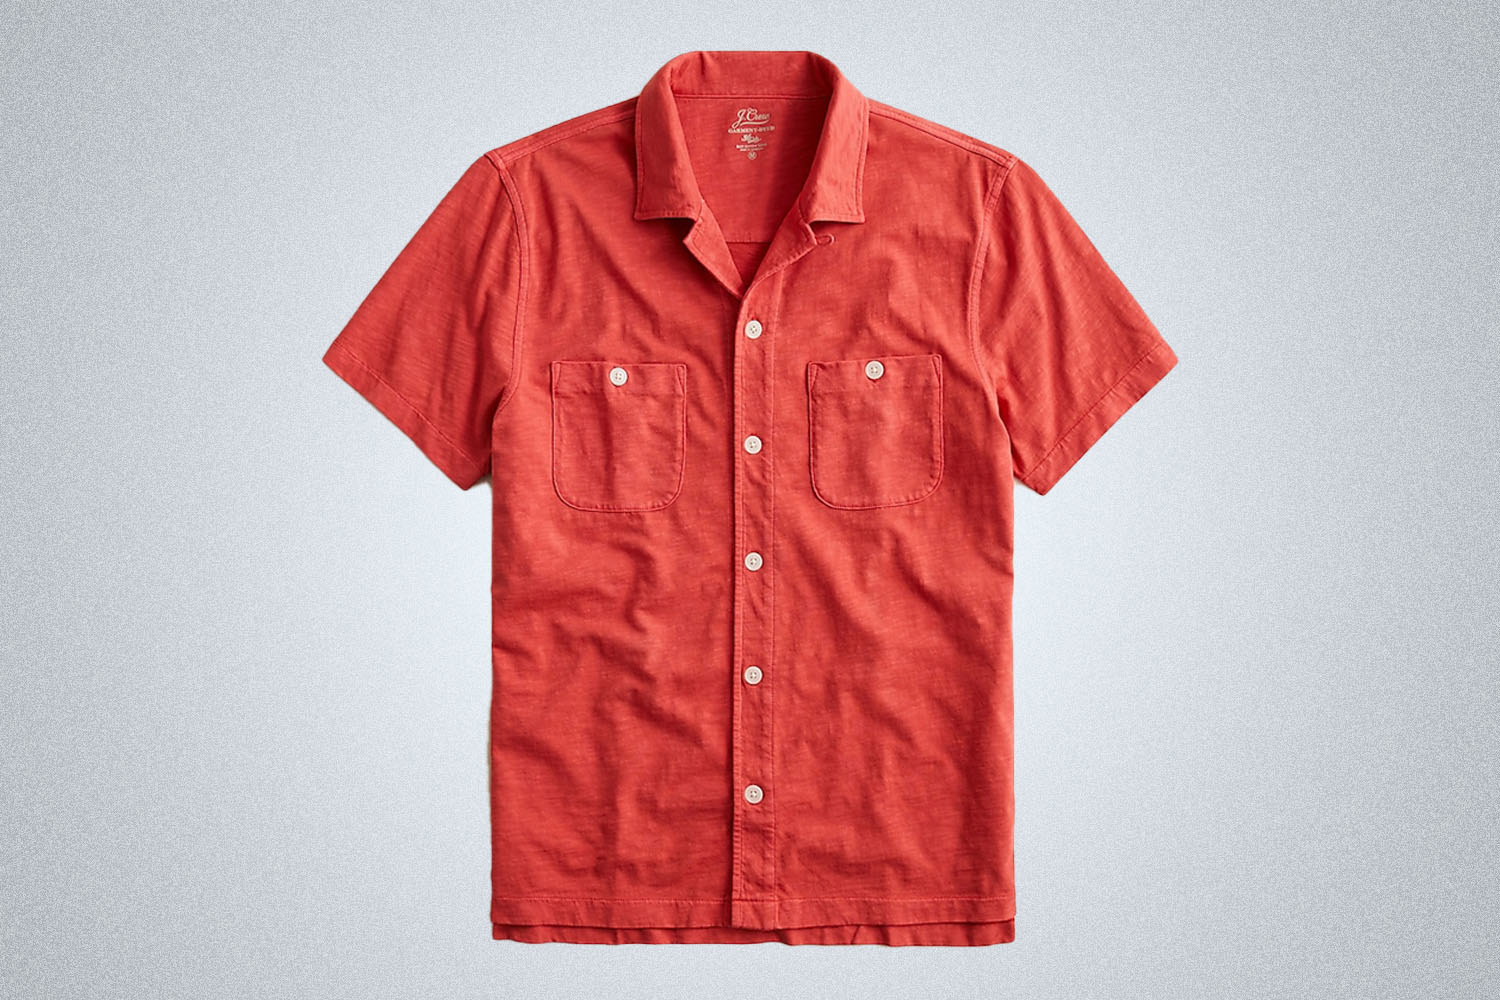 a bright red camp collar shirt from J.Crew on a grey background